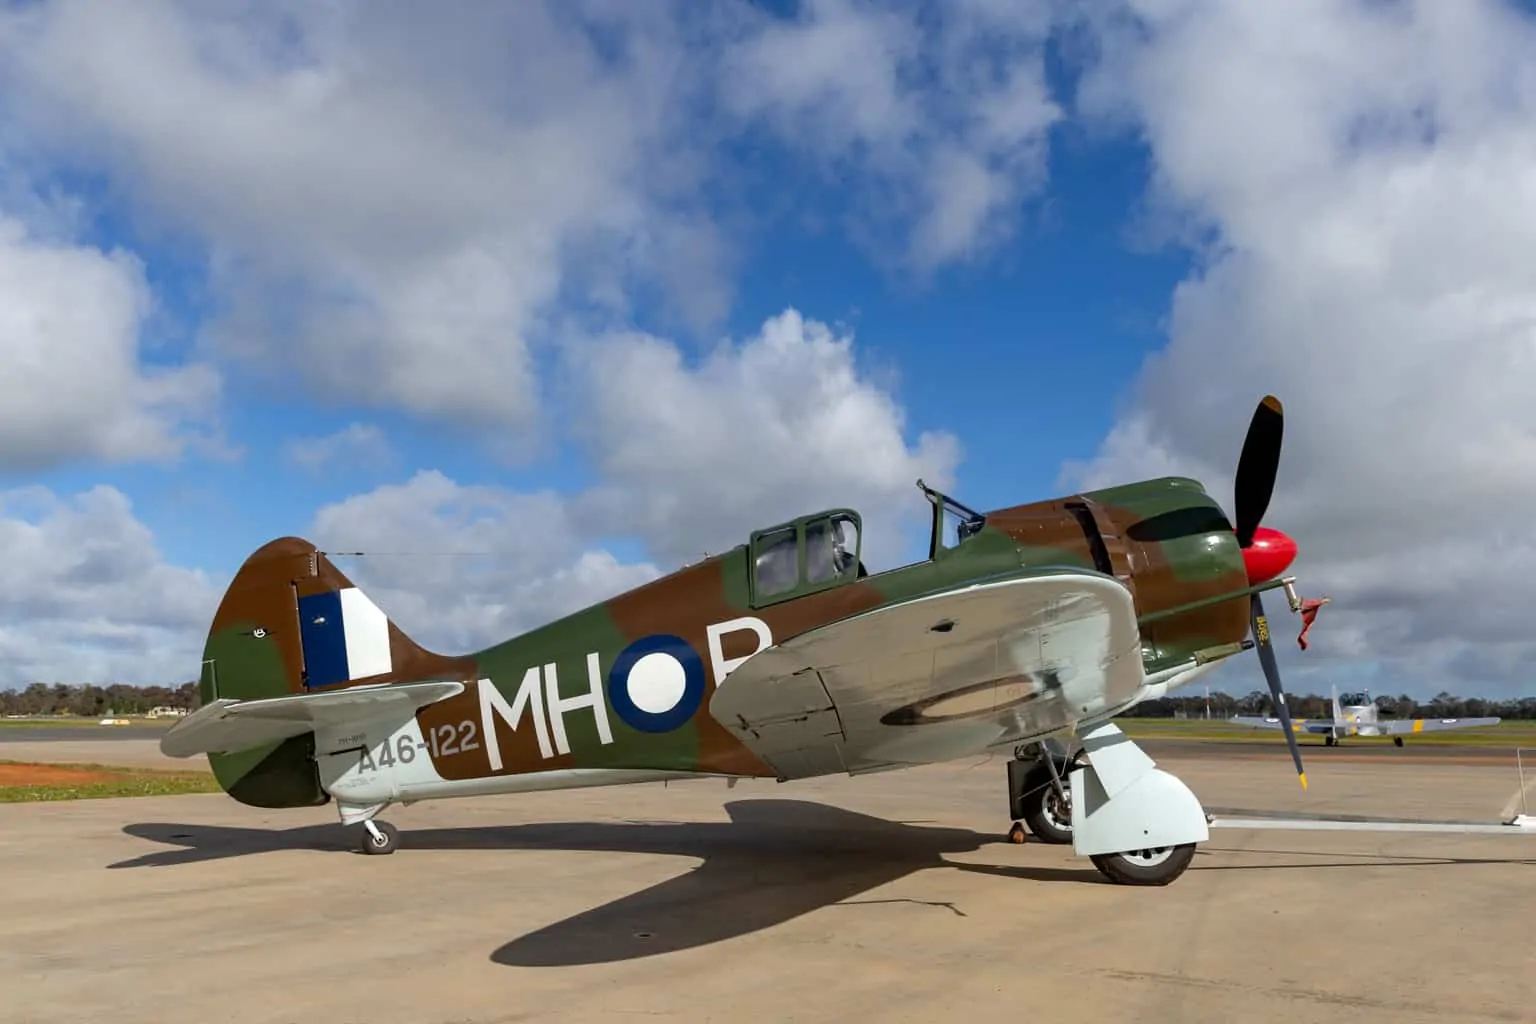 If you're travelling around Australia then these are some of the historic, CA-13 Boomerang fighter planes you'll see at the Temora Aviation Museum.